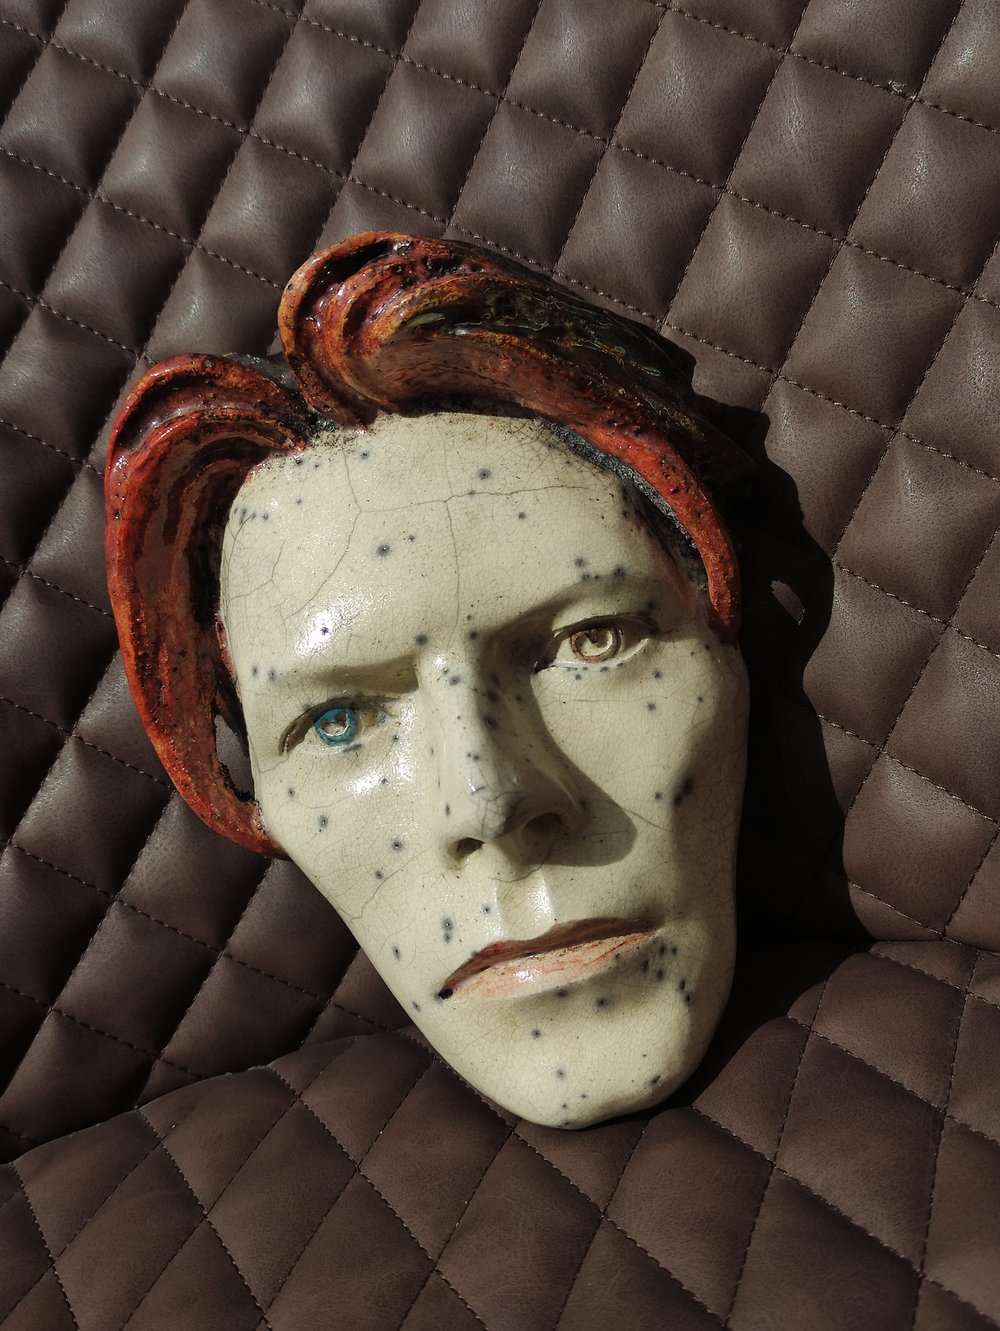 David Bowie 'The Man Who Fell To Earth' Mask Sculpture (Unique Raku Piece)